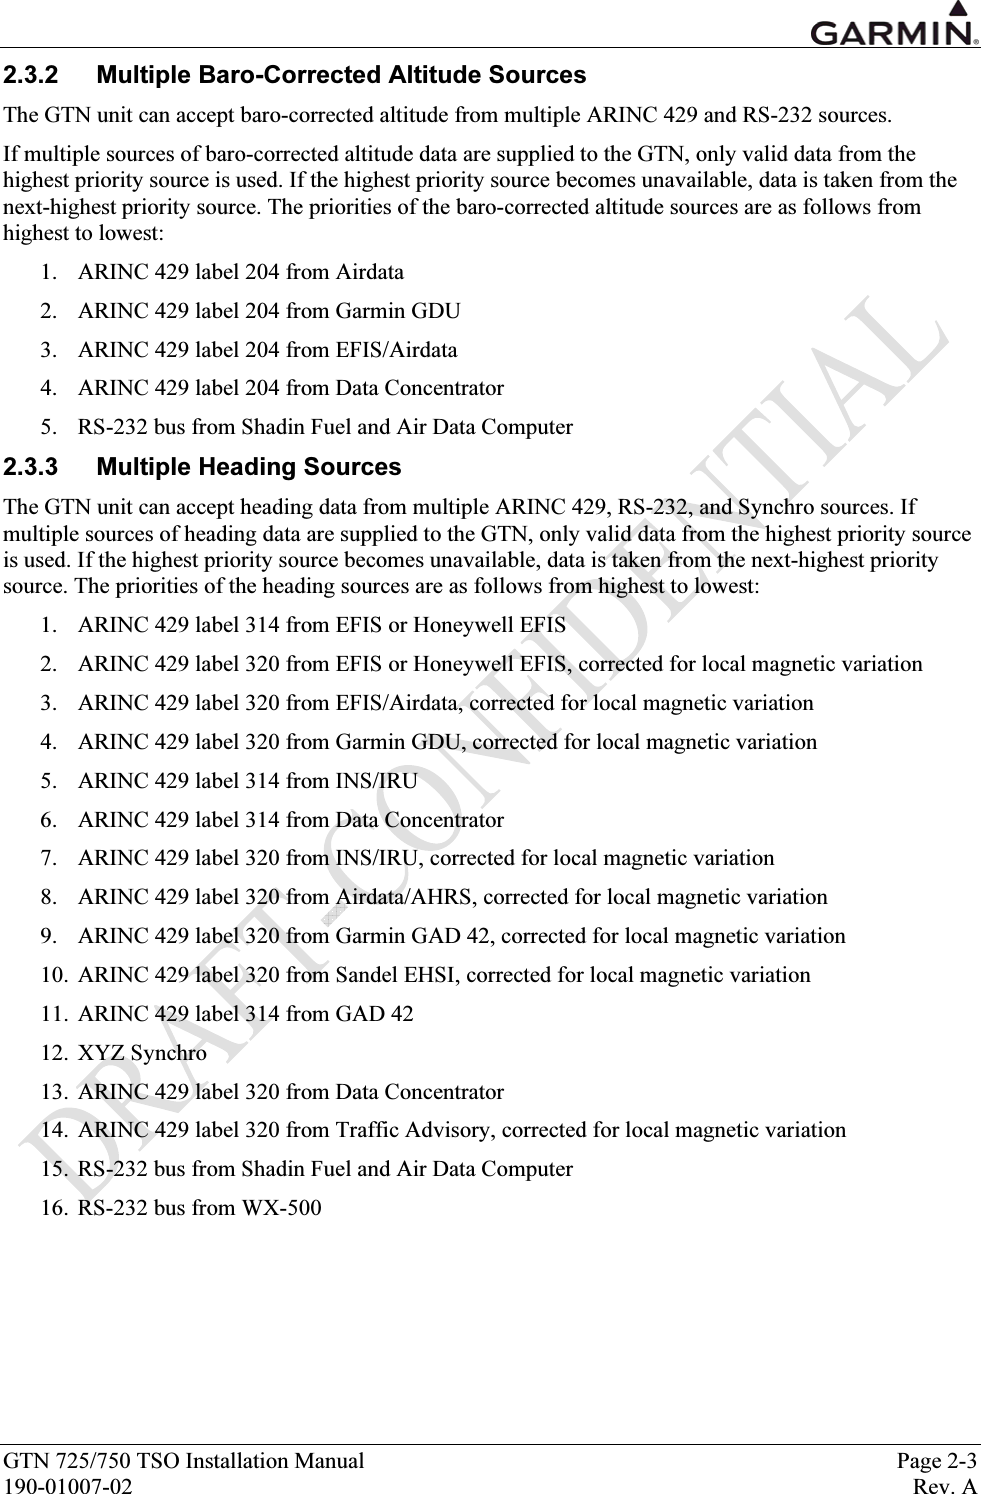  GTN 725/750 TSO Installation Manual  Page 2-3 190-01007-02  Rev. A 2.3.2  Multiple Baro-Corrected Altitude Sources The GTN unit can accept baro-corrected altitude from multiple ARINC 429 and RS-232 sources. If multiple sources of baro-corrected altitude data are supplied to the GTN, only valid data from the highest priority source is used. If the highest priority source becomes unavailable, data is taken from the next-highest priority source. The priorities of the baro-corrected altitude sources are as follows from highest to lowest: 1. ARINC 429 label 204 from Airdata 2. ARINC 429 label 204 from Garmin GDU 3. ARINC 429 label 204 from EFIS/Airdata 4. ARINC 429 label 204 from Data Concentrator 5. RS-232 bus from Shadin Fuel and Air Data Computer 2.3.3  Multiple Heading Sources The GTN unit can accept heading data from multiple ARINC 429, RS-232, and Synchro sources. If multiple sources of heading data are supplied to the GTN, only valid data from the highest priority source is used. If the highest priority source becomes unavailable, data is taken from the next-highest priority source. The priorities of the heading sources are as follows from highest to lowest: 1. ARINC 429 label 314 from EFIS or Honeywell EFIS 2. ARINC 429 label 320 from EFIS or Honeywell EFIS, corrected for local magnetic variation 3. ARINC 429 label 320 from EFIS/Airdata, corrected for local magnetic variation 4. ARINC 429 label 320 from Garmin GDU, corrected for local magnetic variation 5. ARINC 429 label 314 from INS/IRU 6. ARINC 429 label 314 from Data Concentrator 7. ARINC 429 label 320 from INS/IRU, corrected for local magnetic variation 8. ARINC 429 label 320 from Airdata/AHRS, corrected for local magnetic variation 9. ARINC 429 label 320 from Garmin GAD 42, corrected for local magnetic variation 10. ARINC 429 label 320 from Sandel EHSI, corrected for local magnetic variation 11. ARINC 429 label 314 from GAD 42 12. XYZ Synchro 13. ARINC 429 label 320 from Data Concentrator 14. ARINC 429 label 320 from Traffic Advisory, corrected for local magnetic variation 15. RS-232 bus from Shadin Fuel and Air Data Computer 16. RS-232 bus from WX-500 